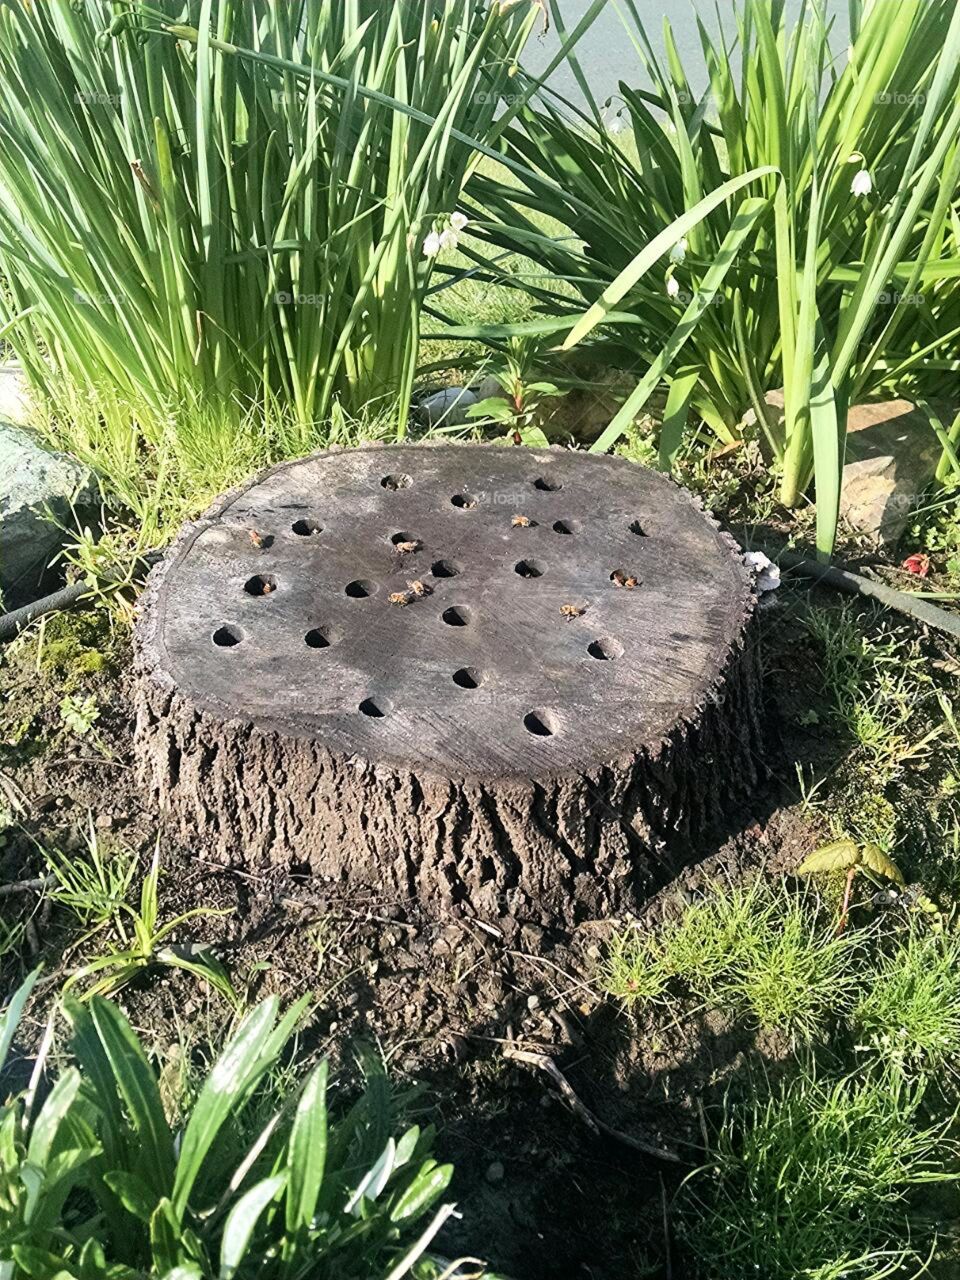 bees in stump